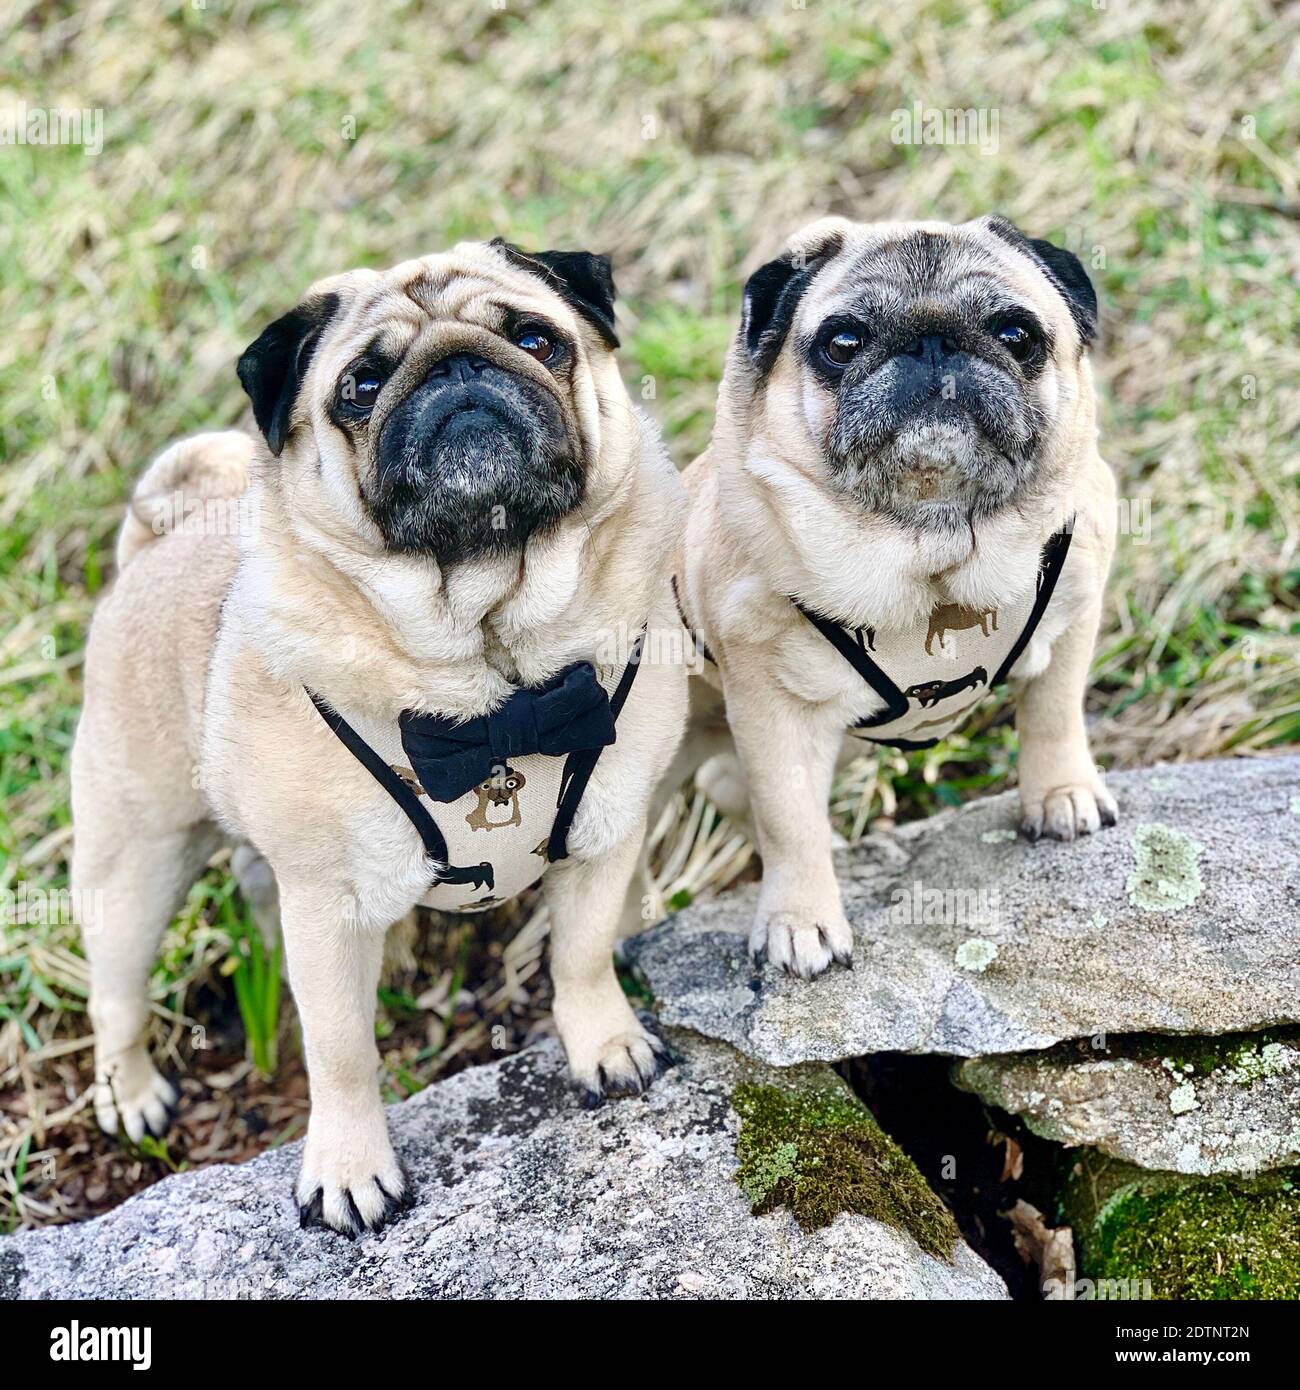 Pugs Perched On Rock Looking At Viewer Stock Photo